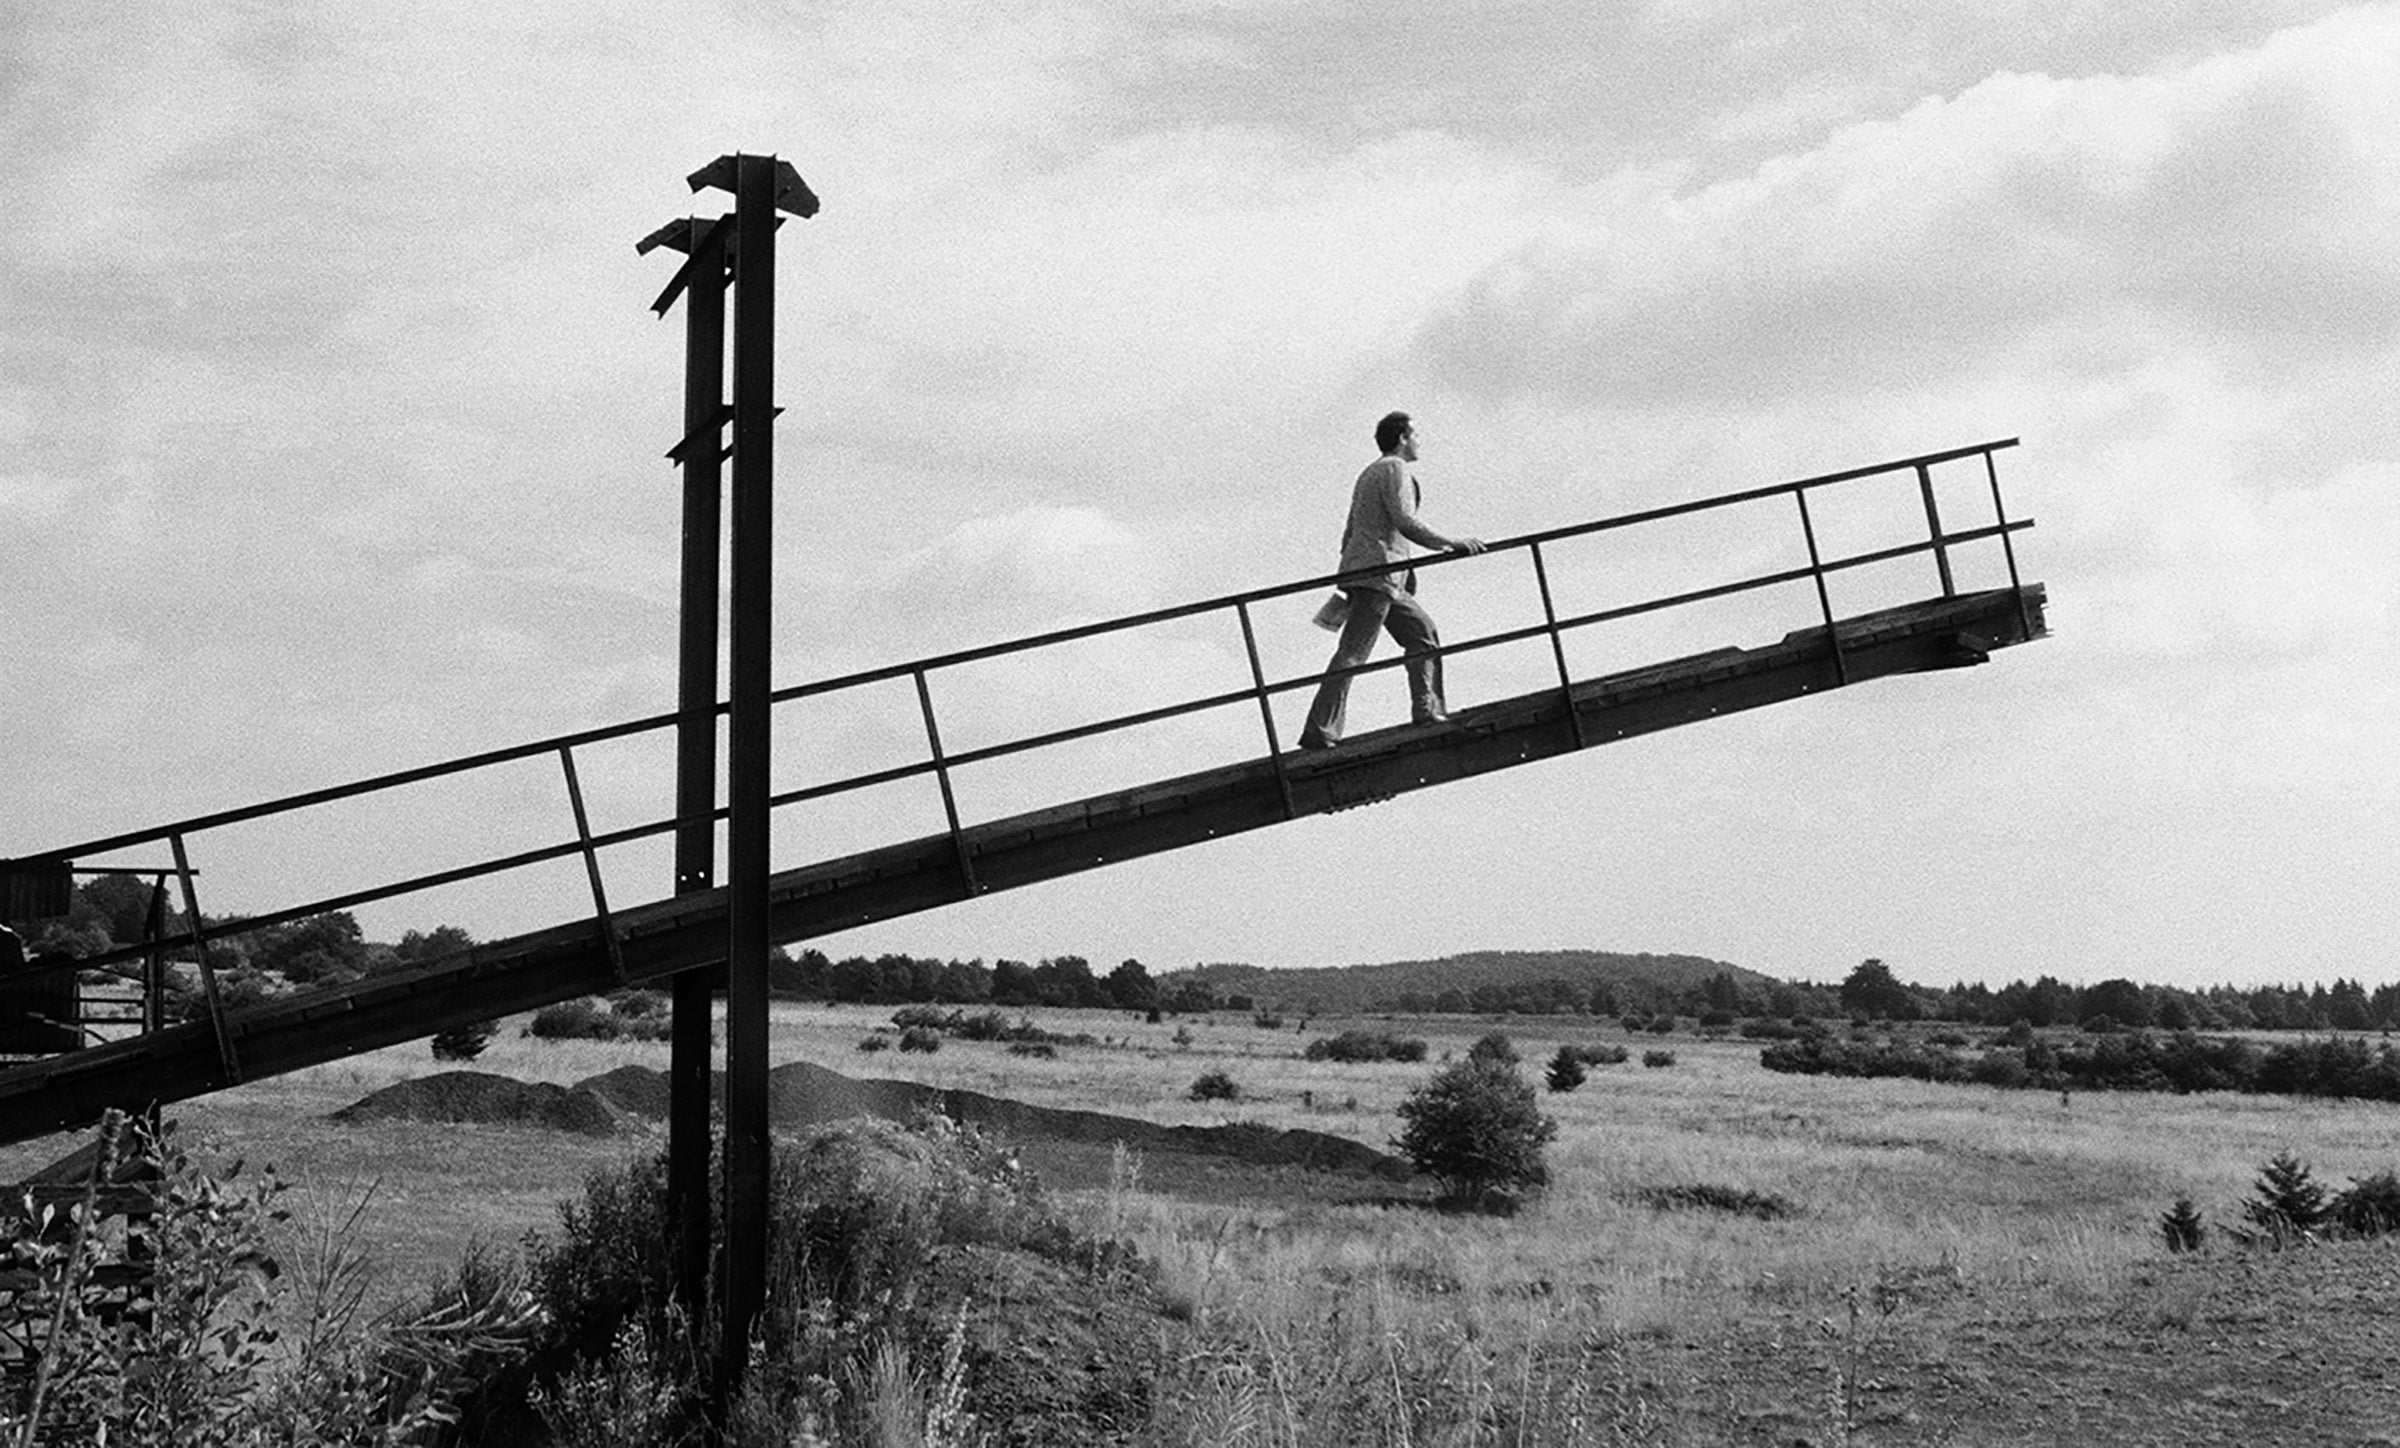 The Road Trilogy by Wim Wenders